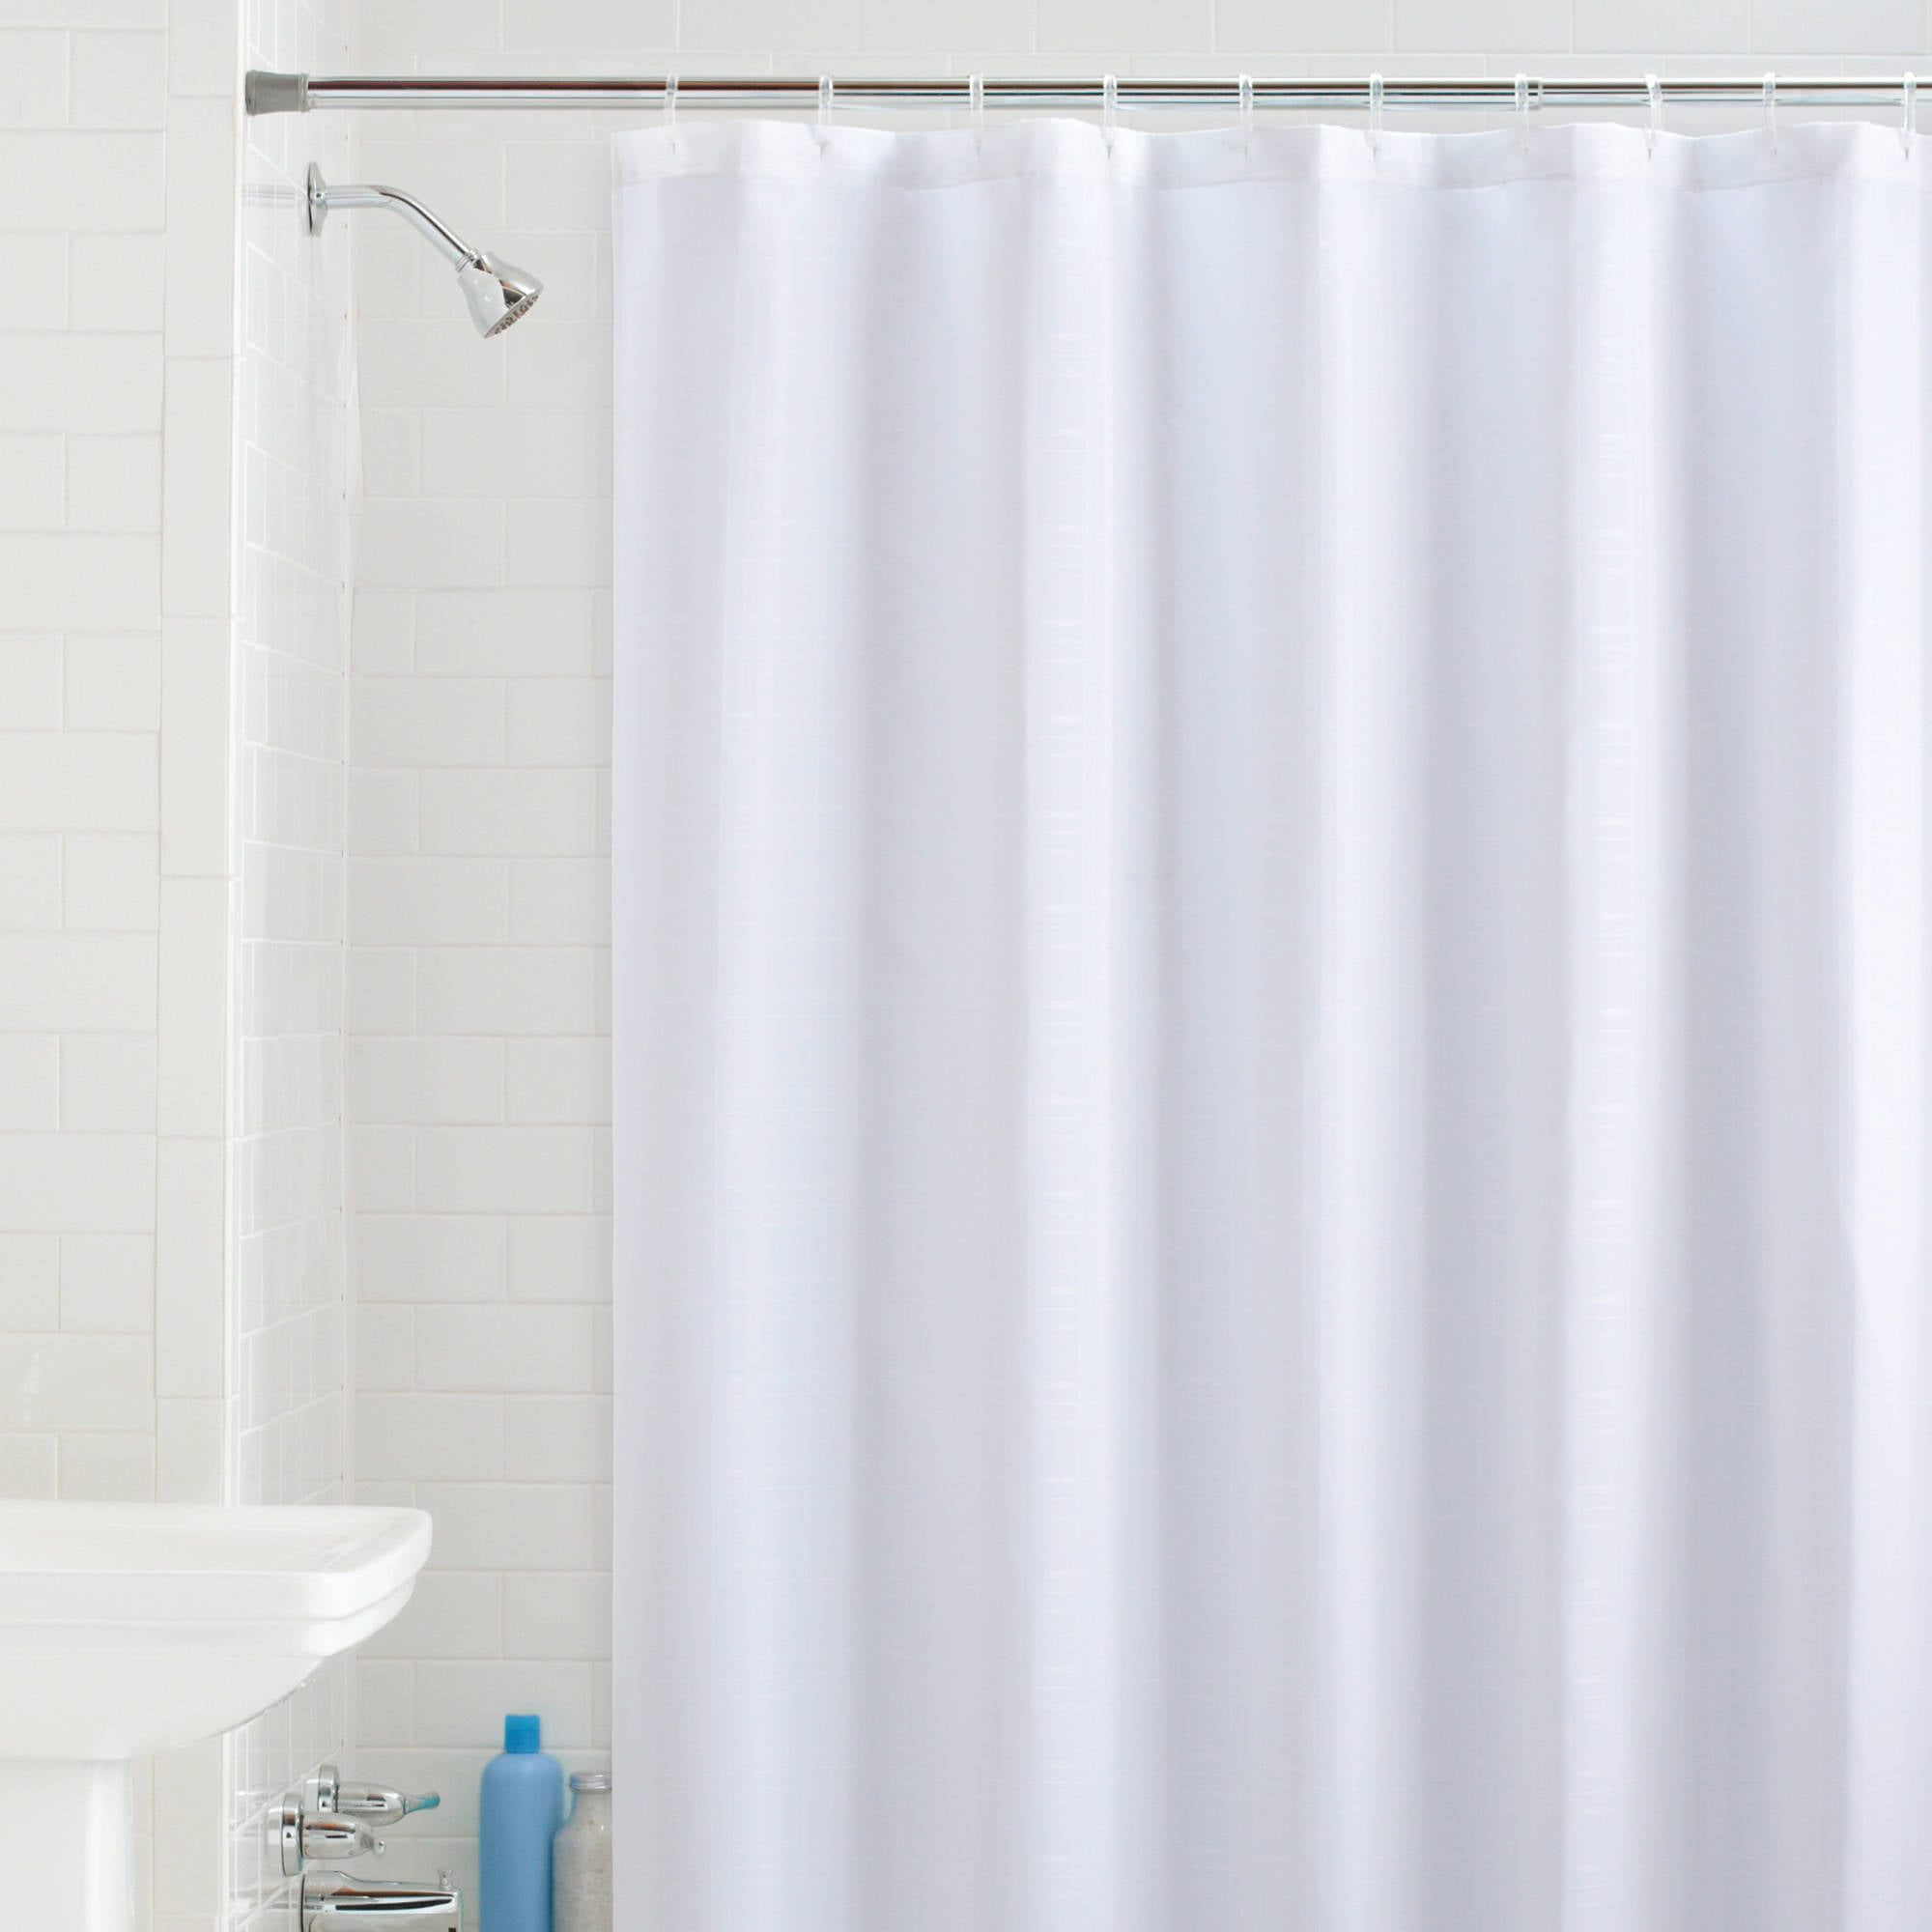 Mildew Resistant Fabric Shower Curtain, How To Remove Mildew From Cloth Shower Curtain